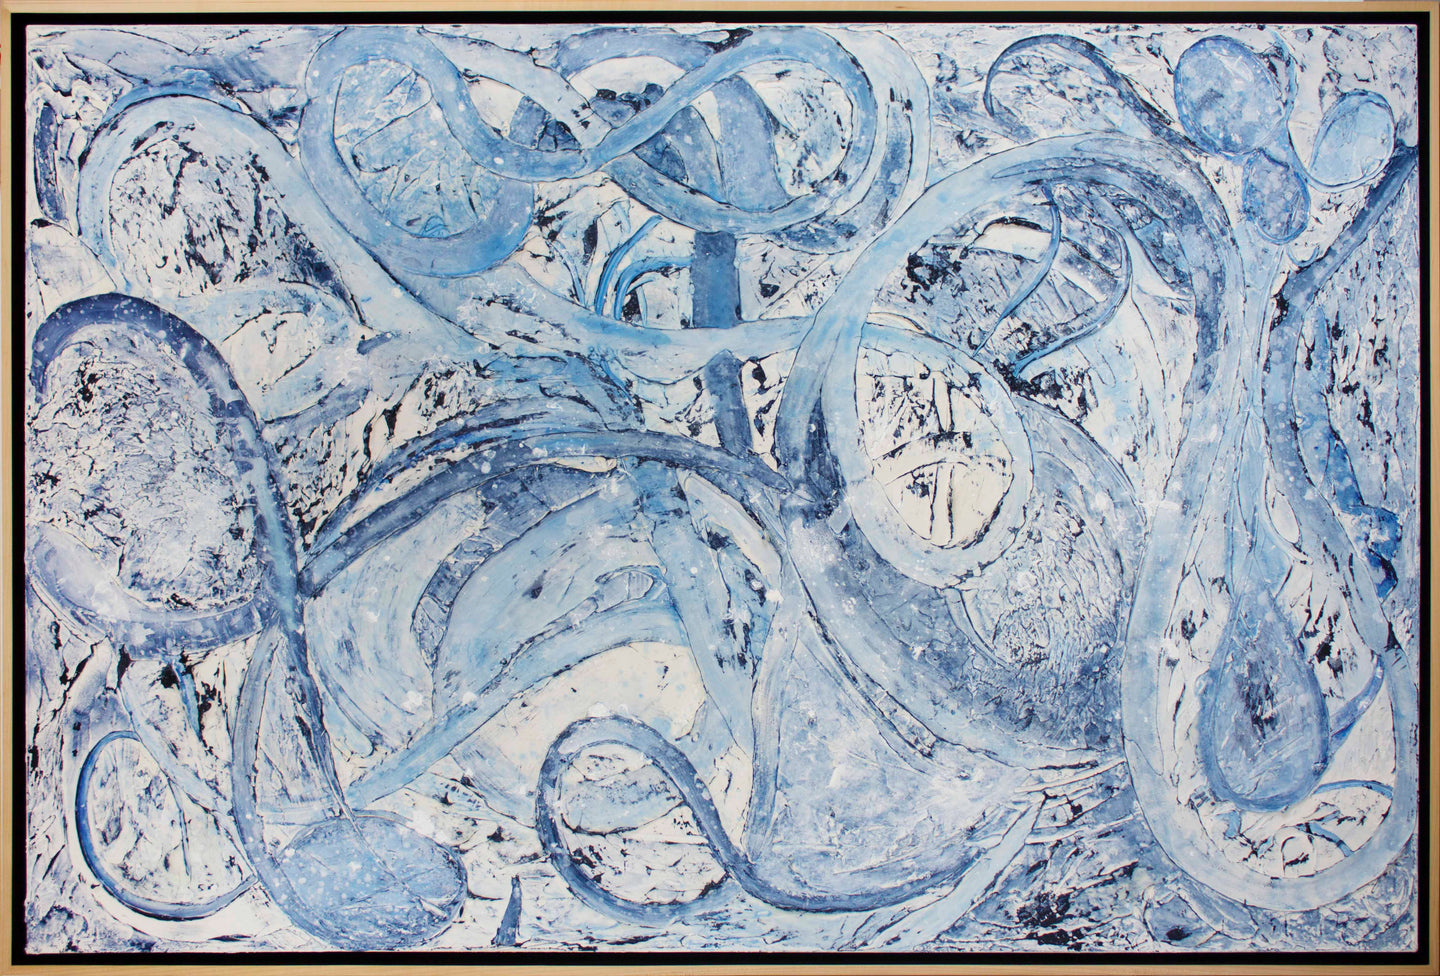 Jill Krutick (B. 1962 - ) The Journey, 2018  Acrylic on Canvas  48 x 72 inches ; Framed: 50 x 74 inches  Much like an ice skater, this Swirl piece uses marks that glide and dance across the canvas. The balance between spontaneity and choreography as the movements take place is what creates interest in the dance and excitement in the adventure. This is large abstract and contemporary painting in Blue and white. Manolis Projects gallery in Miami, FL